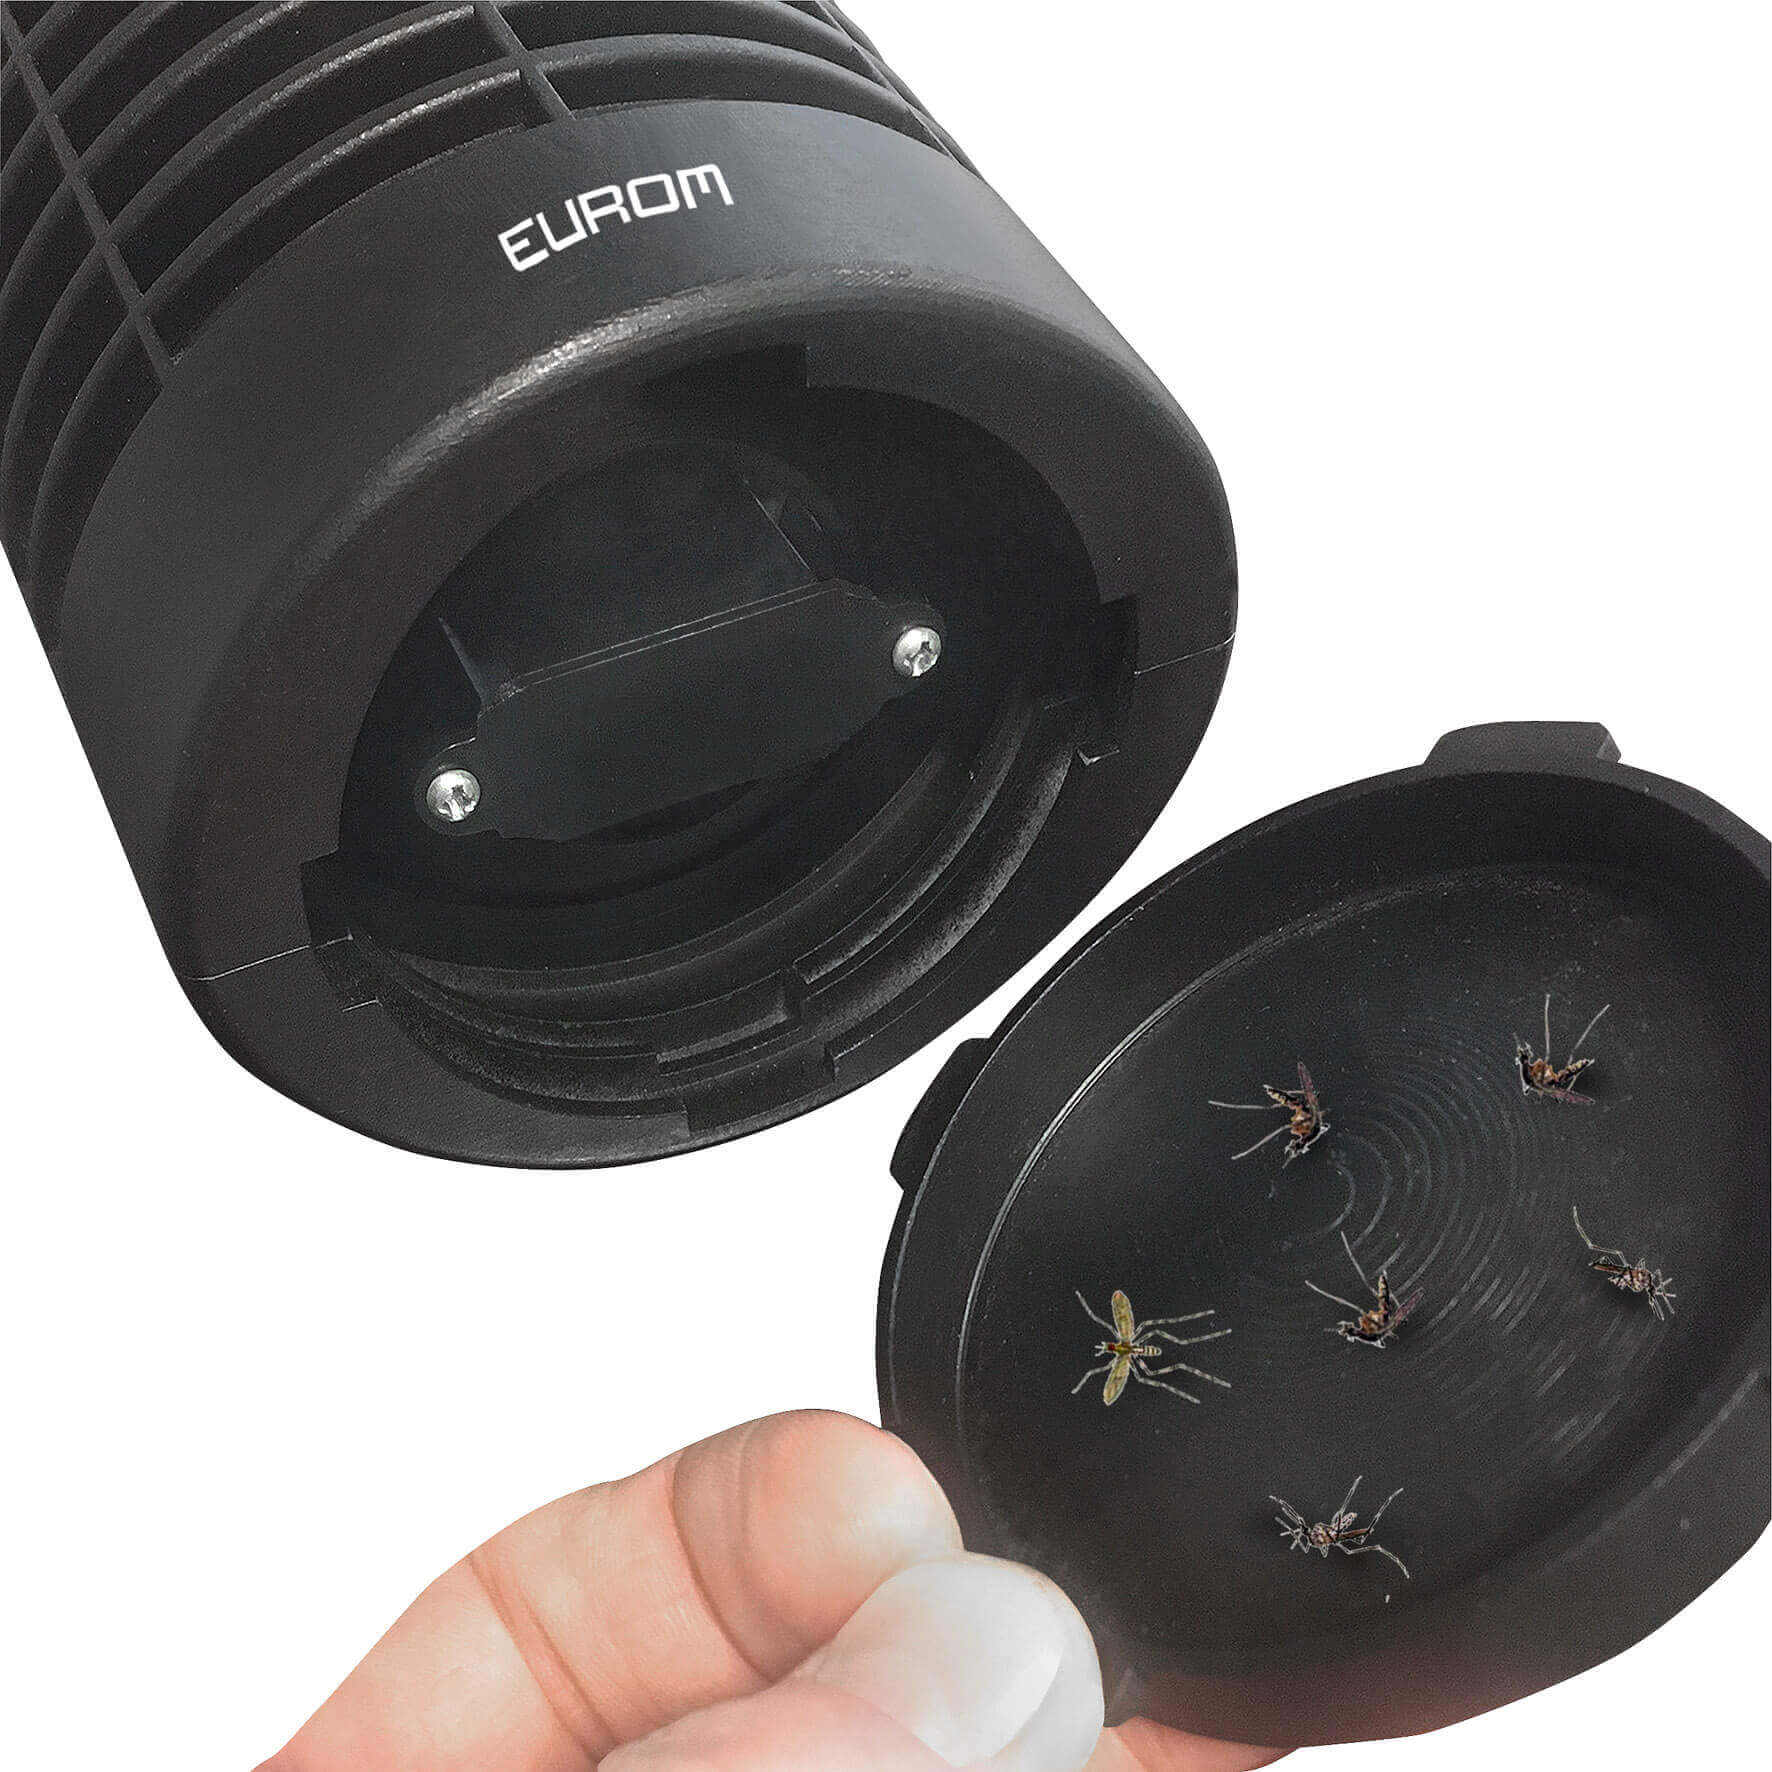 Aparat UV impotriva insectelor/muste/tantari EUROM FLY AWAY 7-OVAL - CampShop.ro